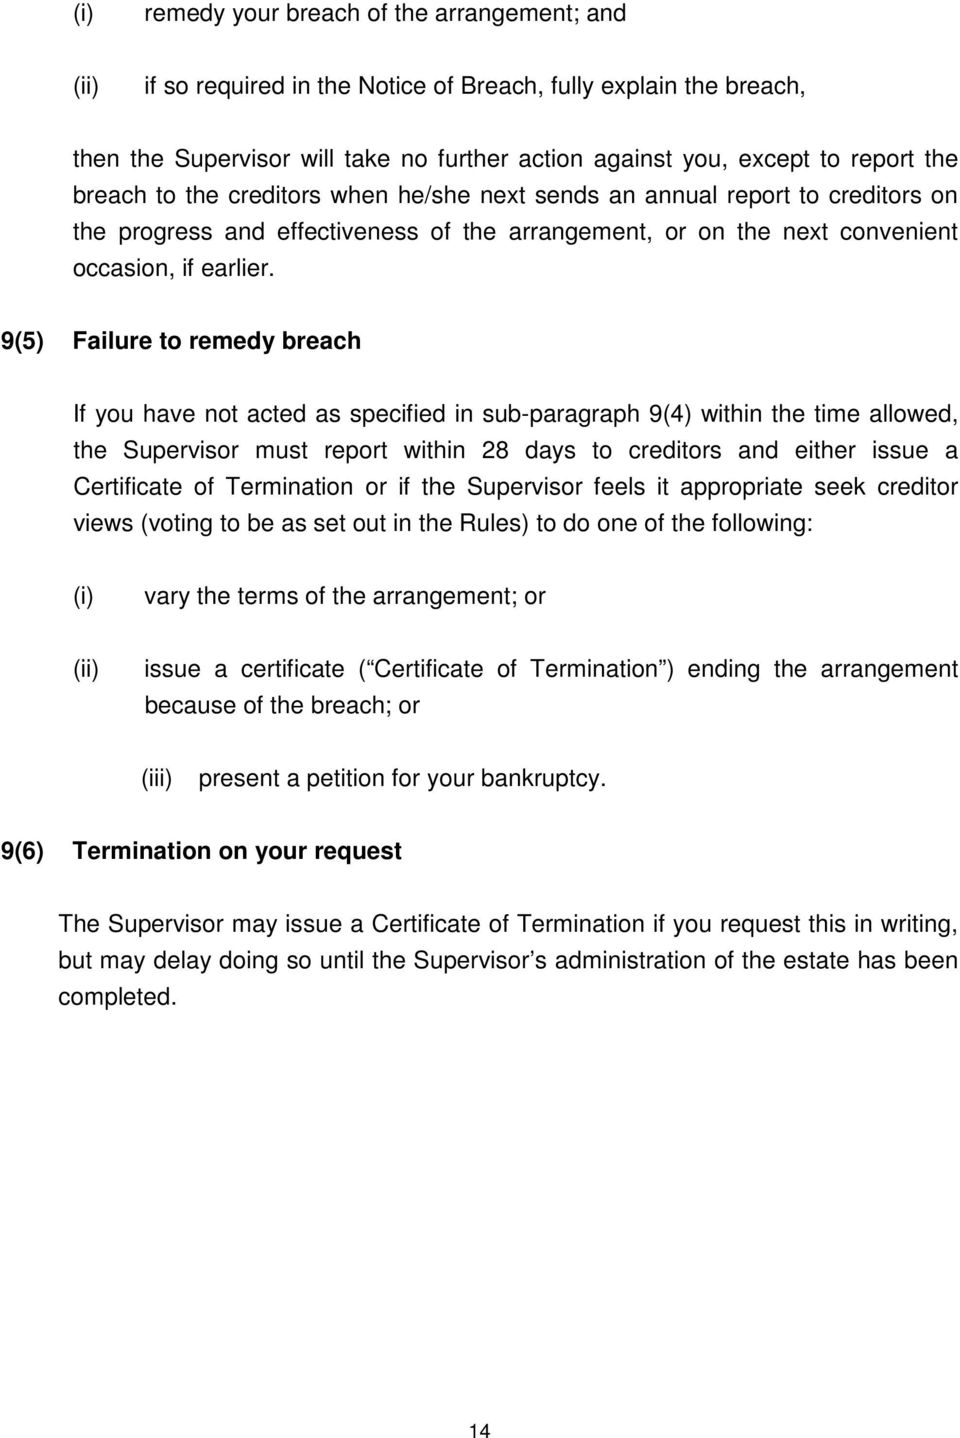 9(5) Failure to remedy breach If you have not acted as specified in sub-paragraph 9(4) within the time allowed, the Supervisor must report within 28 days to creditors and either issue a Certificate